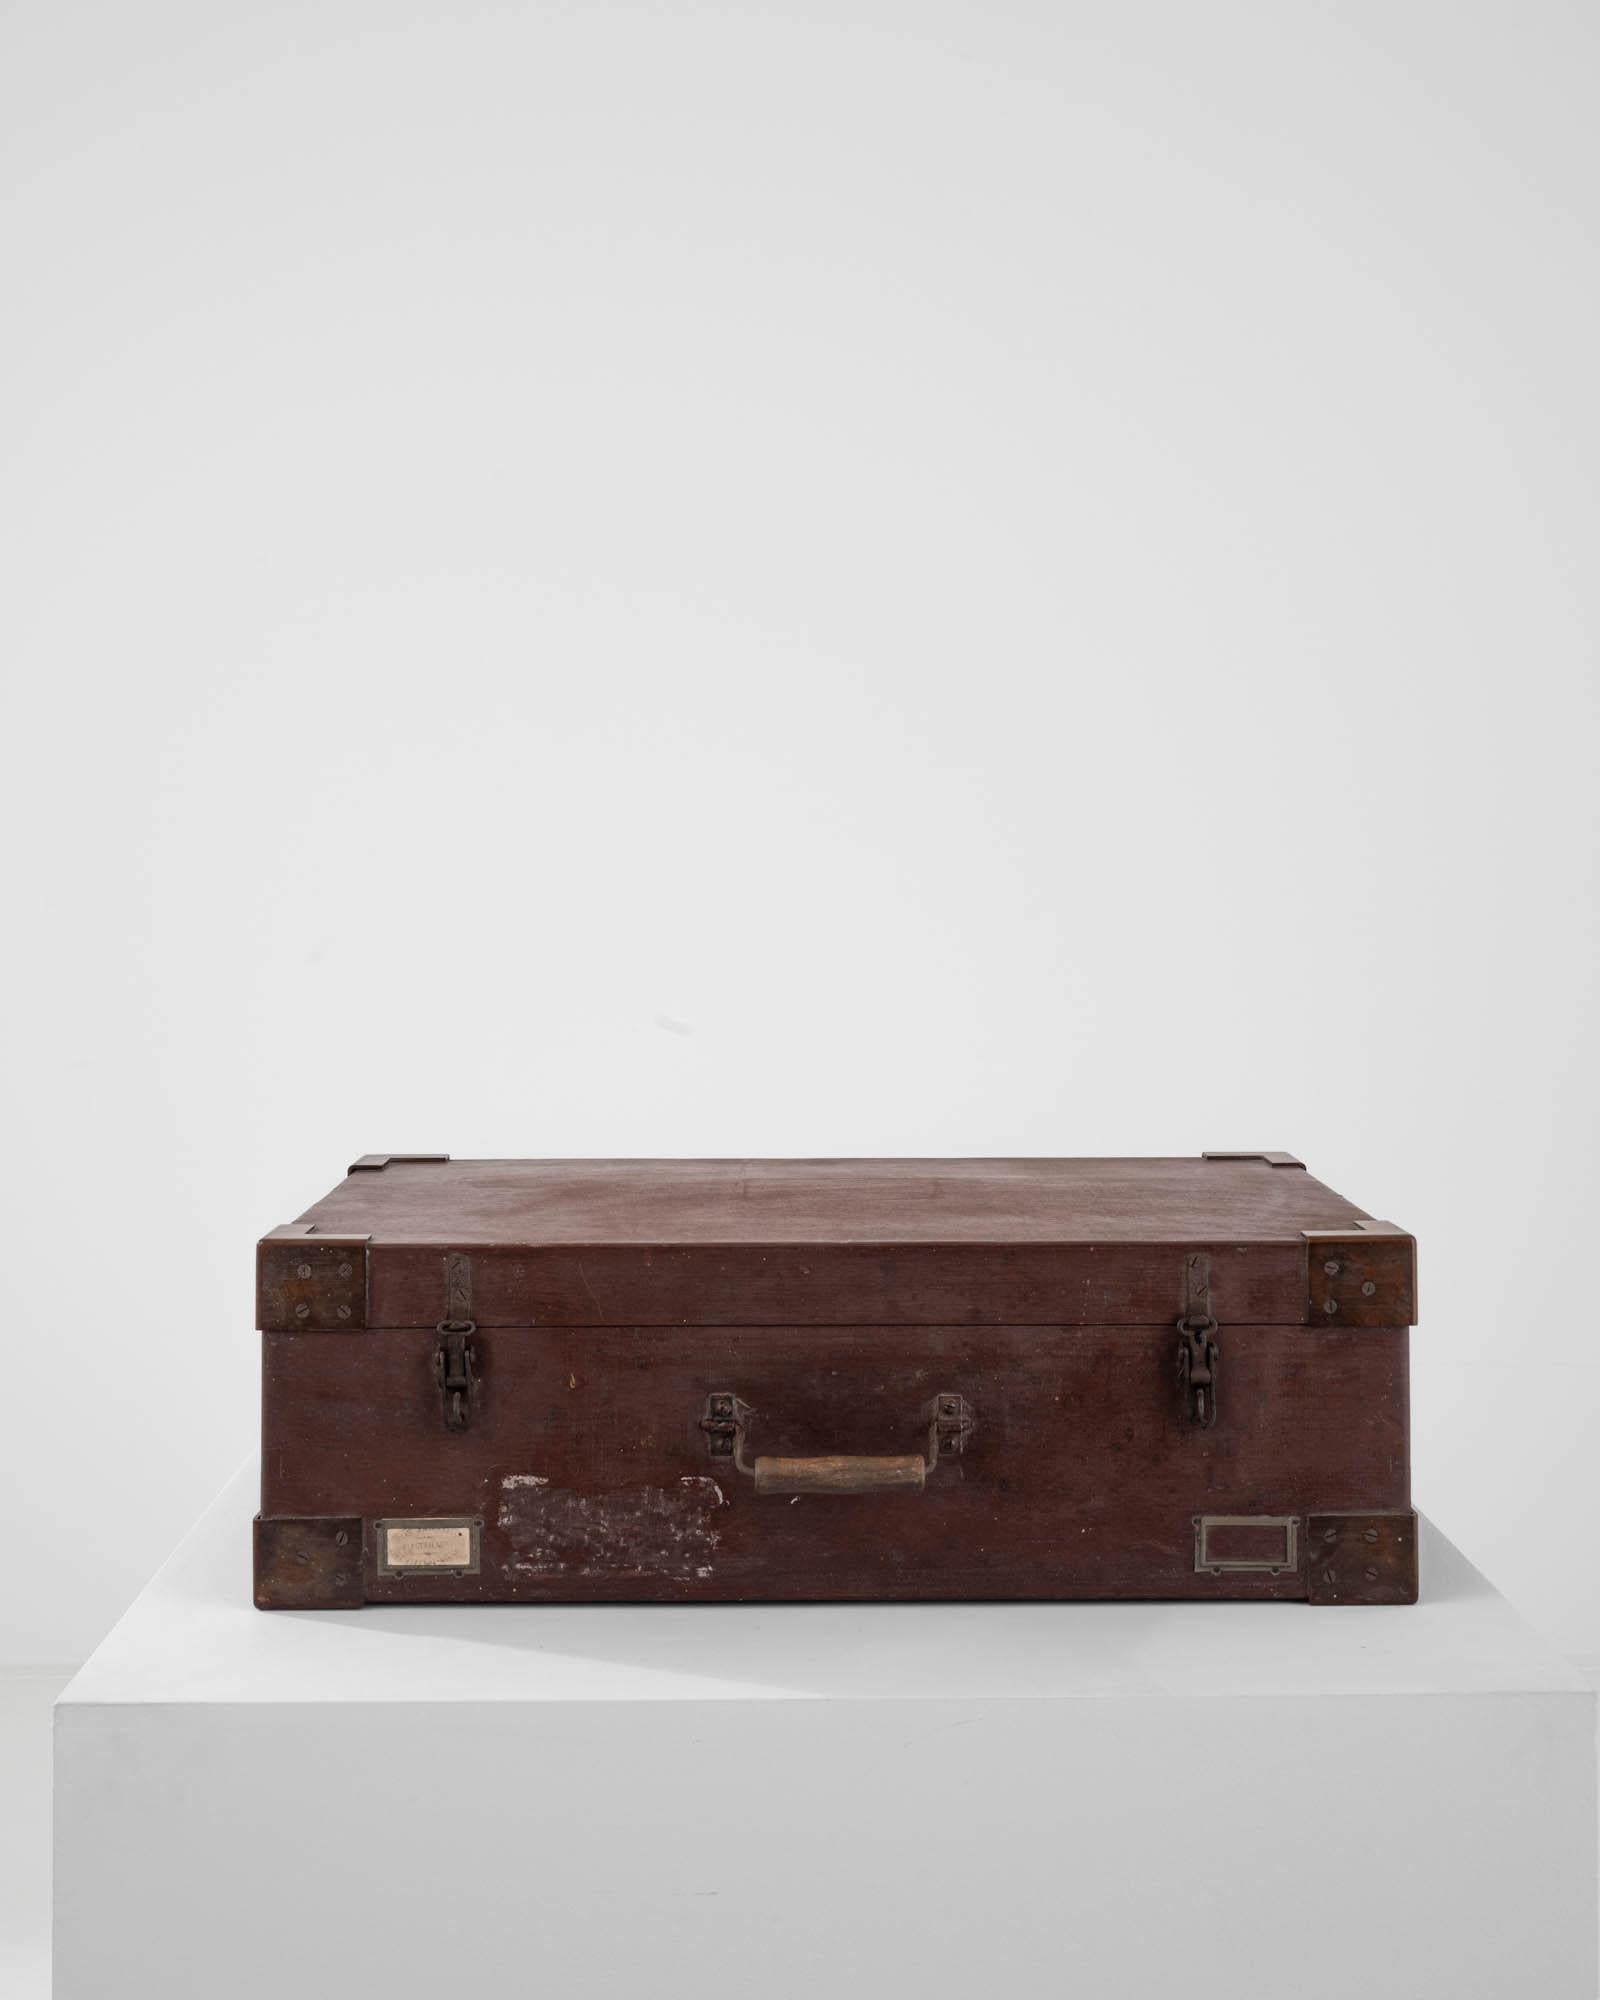 This 20th-century wooden case is a genuine gem for enthusiasts of plein-air art sessions. Handcrafted in Germany, the suitcase is protected by metal corners that accentuate its platonic shape. The secure metal hinges are executed in the same